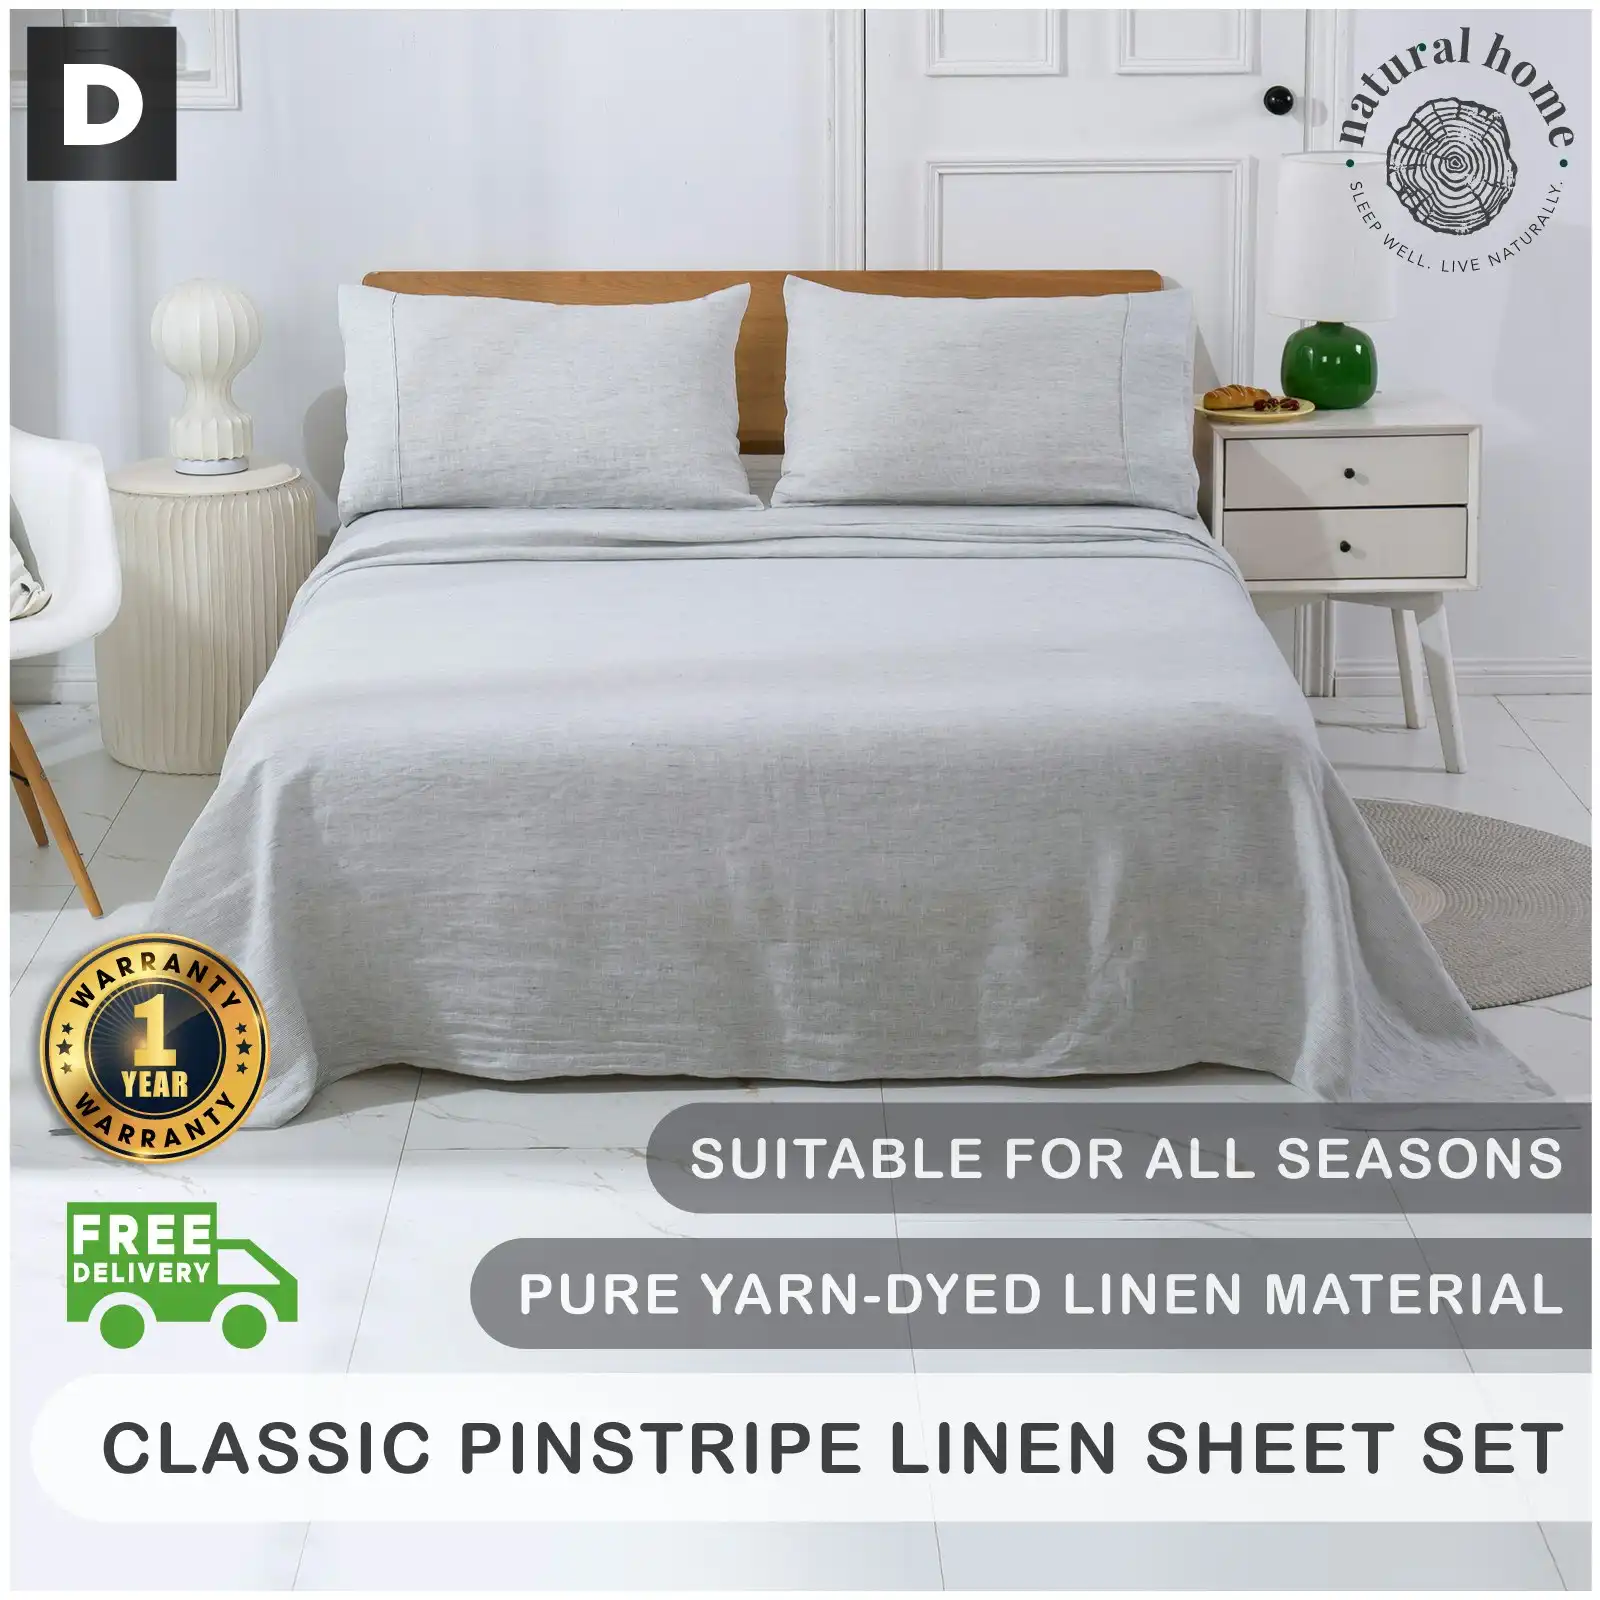 Natural Home Classic Pinstripe Linen Sheet Set White with Dark Pinstripe Double Bed